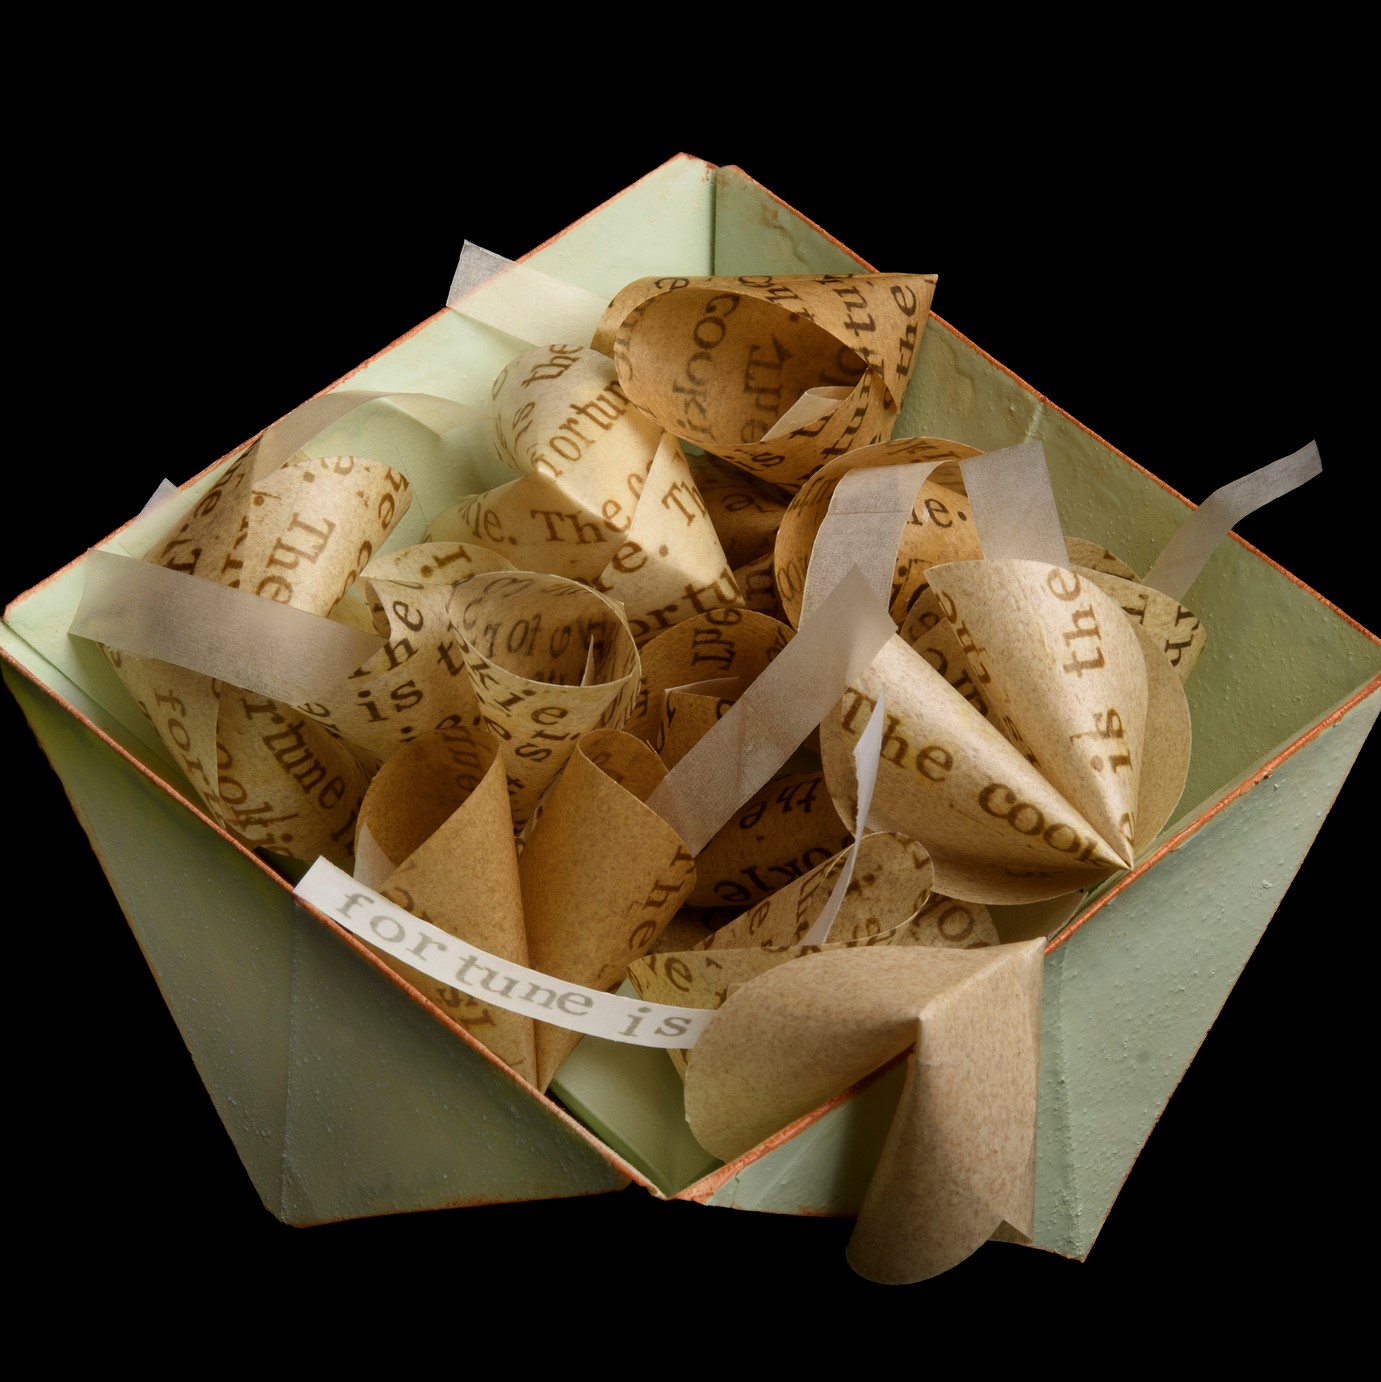 a mint green, paper oragami bowl holds multiple fortune cookies with handpritned messages on them that say, "The fortune is the cookie. The cookie is the fortune," on both the fortune cookie and the paper inside. 